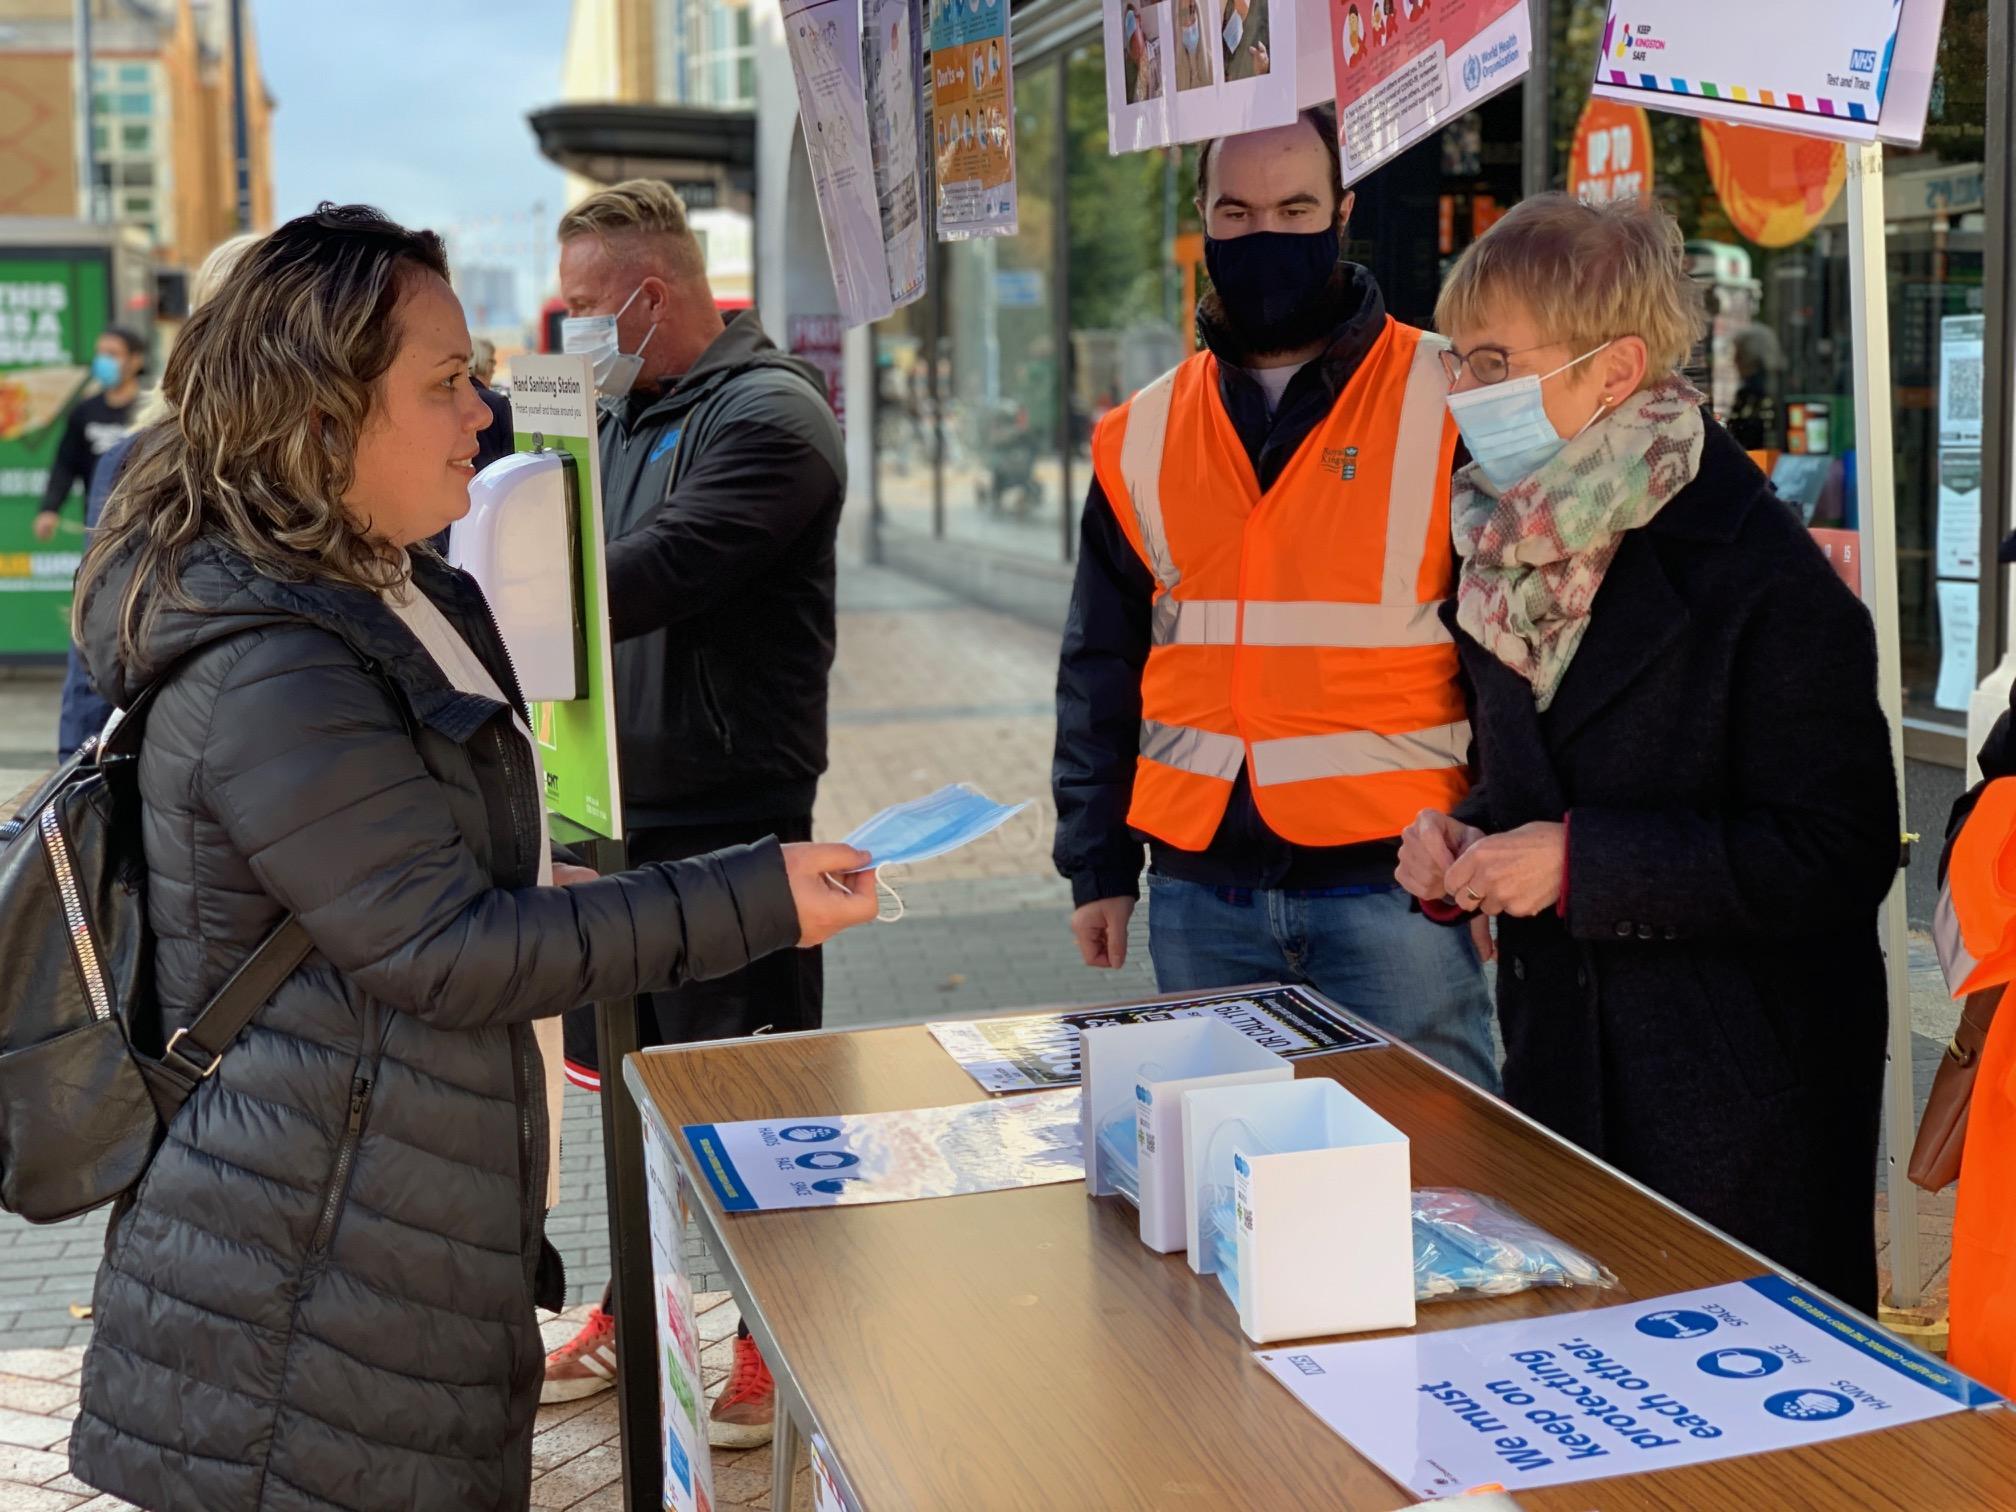 Council Leader Caroline Kerr at the face mask stall in Kingston